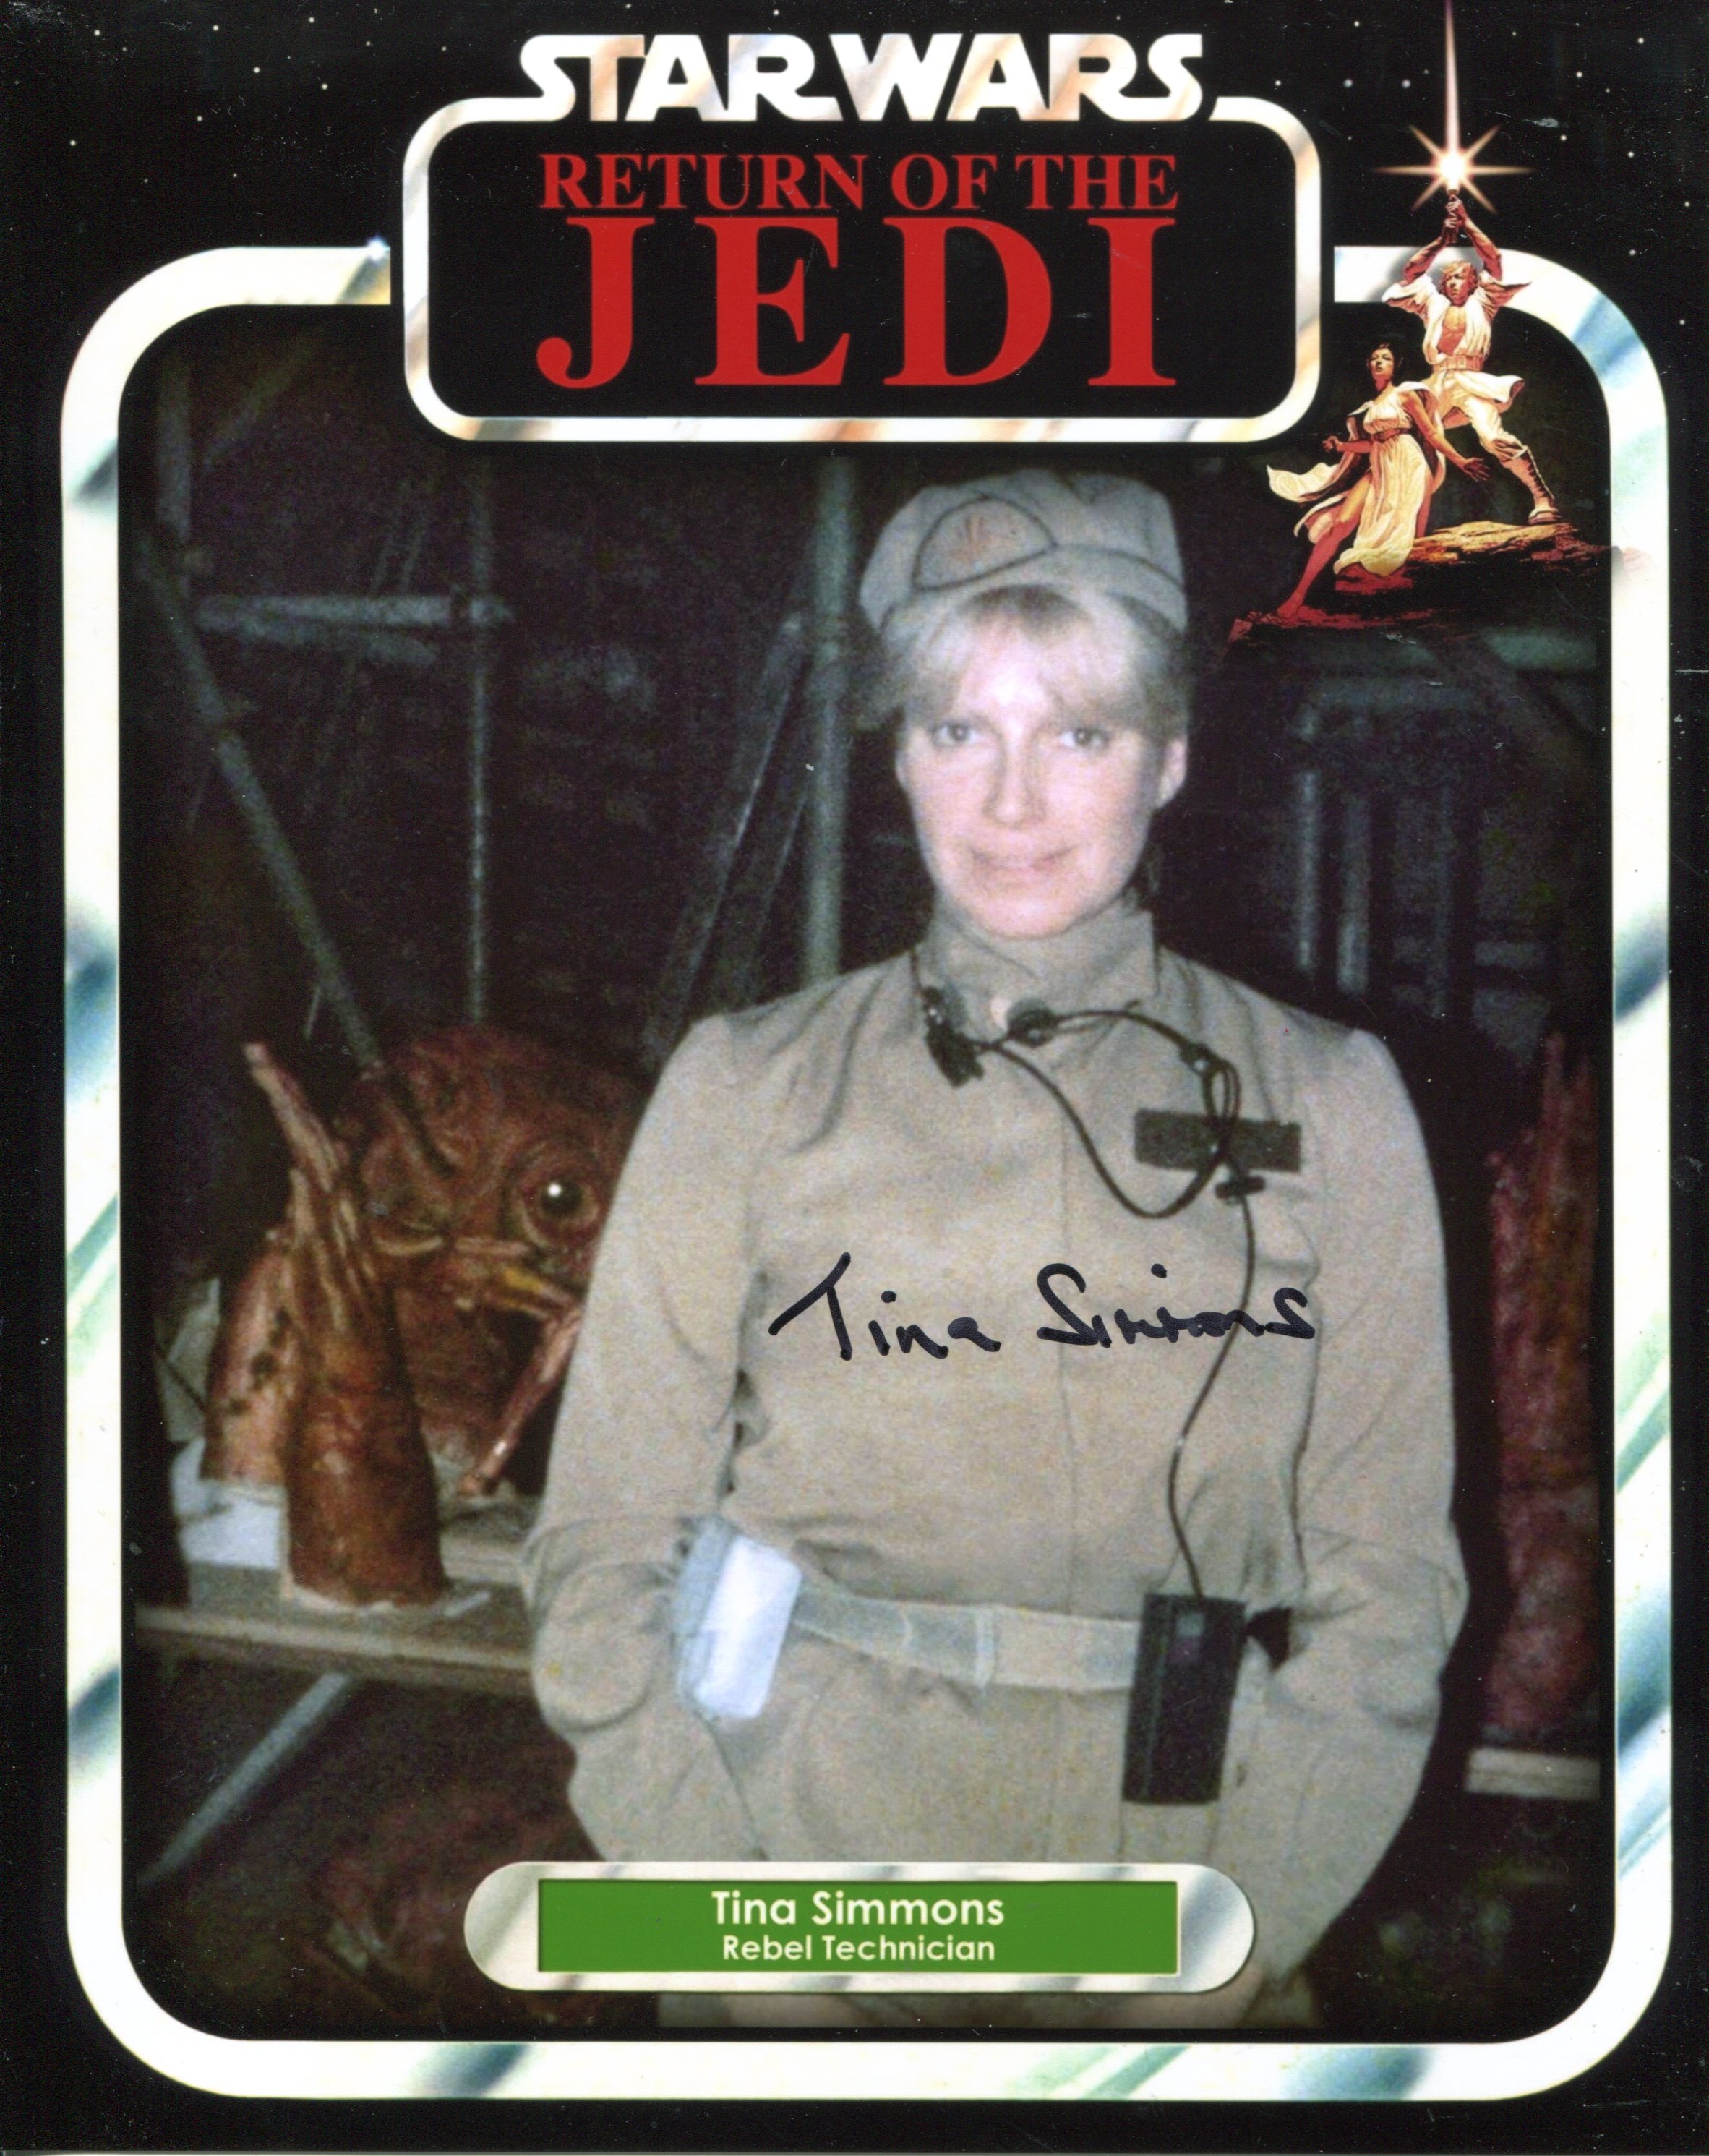 Star Wars. 8 x 10 inch photo signed by Star Wars actress Tina Simmons who played a Rebel technician.